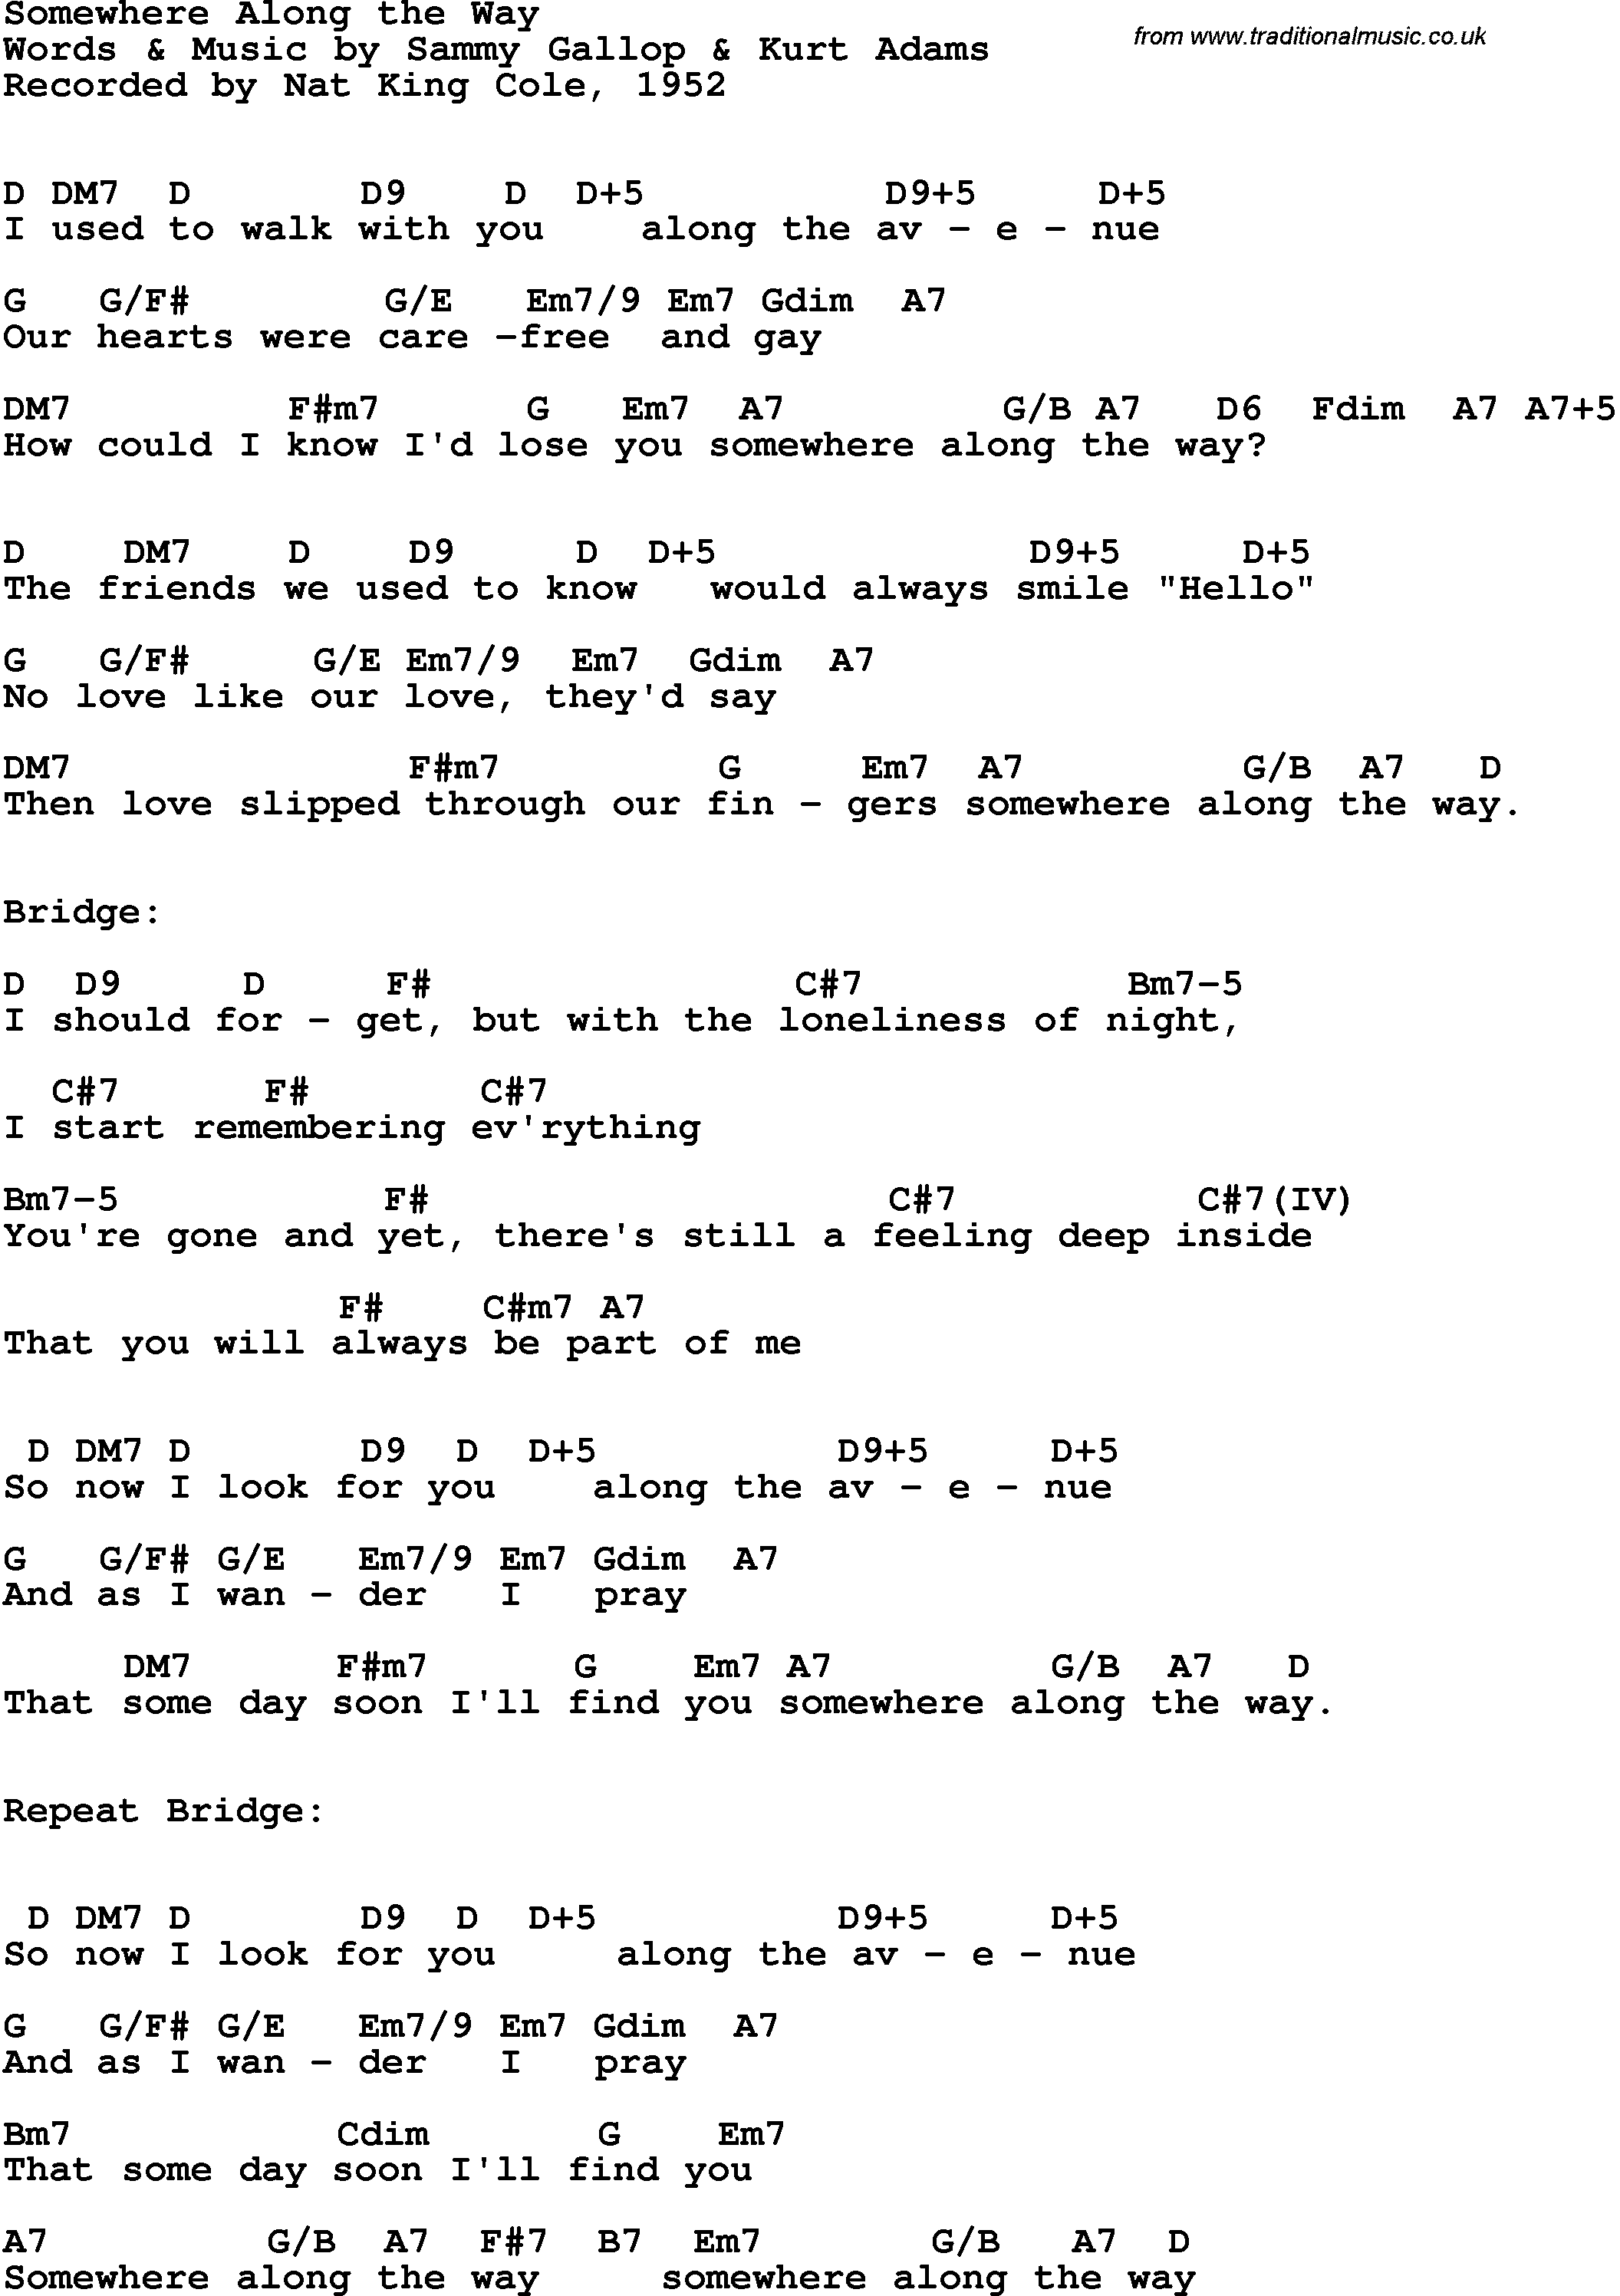 Song Lyrics with guitar chords for Somewhere Along The Way - Nat King Cole, 1952